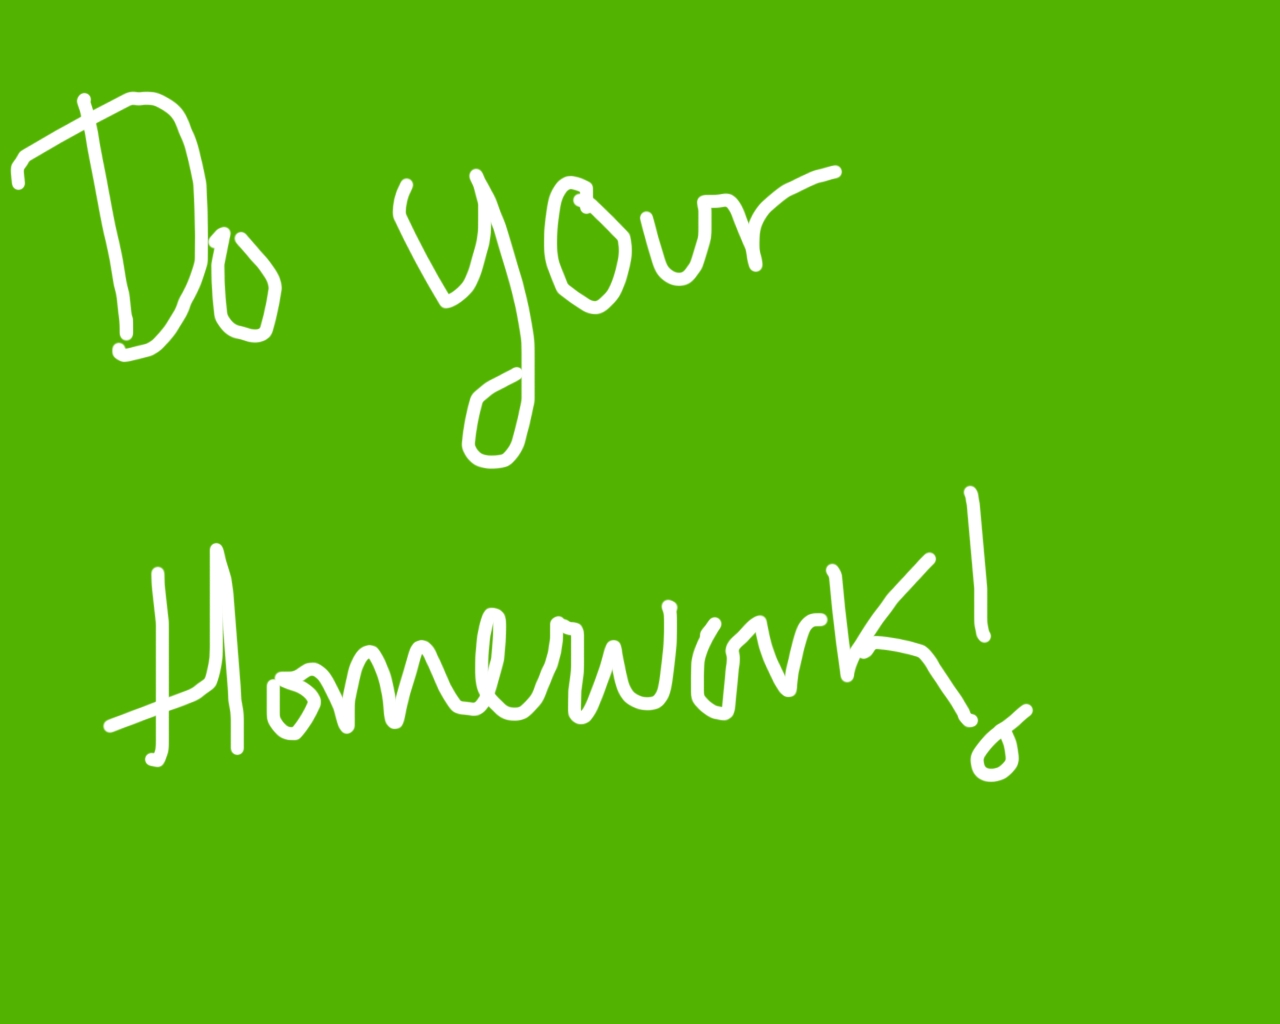 homework needs to be given